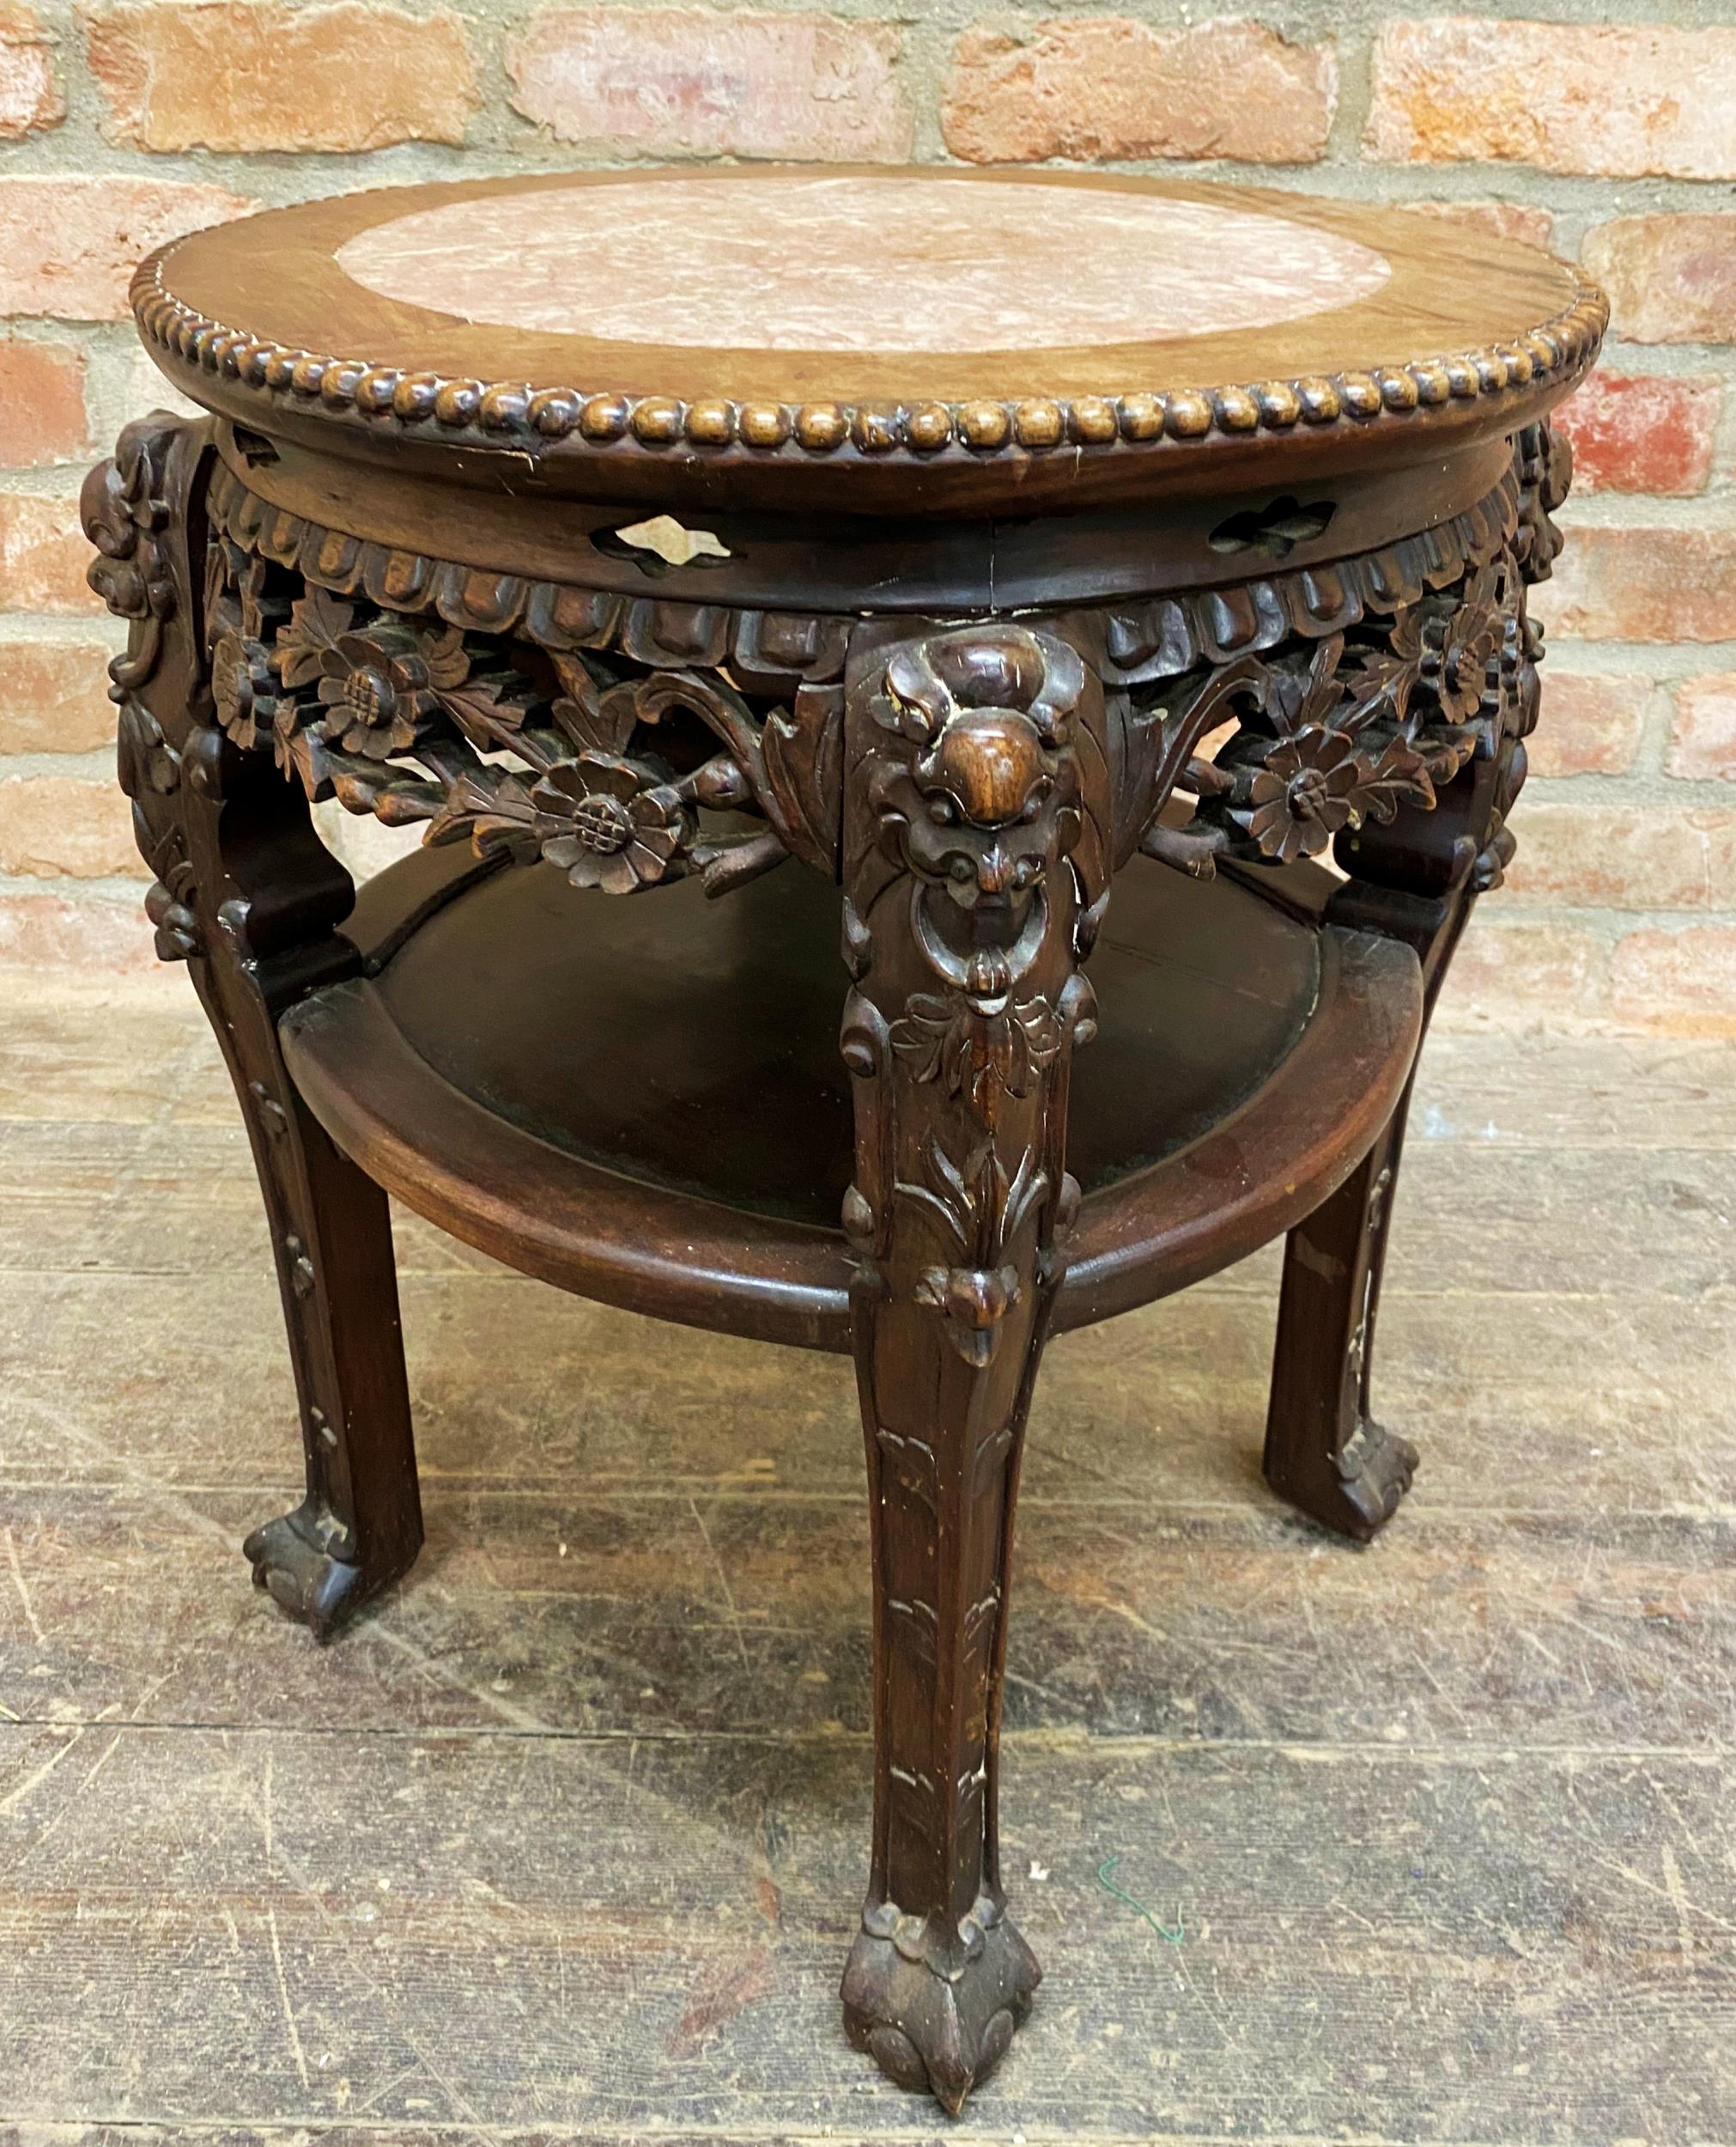 19th Century Chinese Padauk wood pot stand with inset marble top and typical carved frame, H 58cm